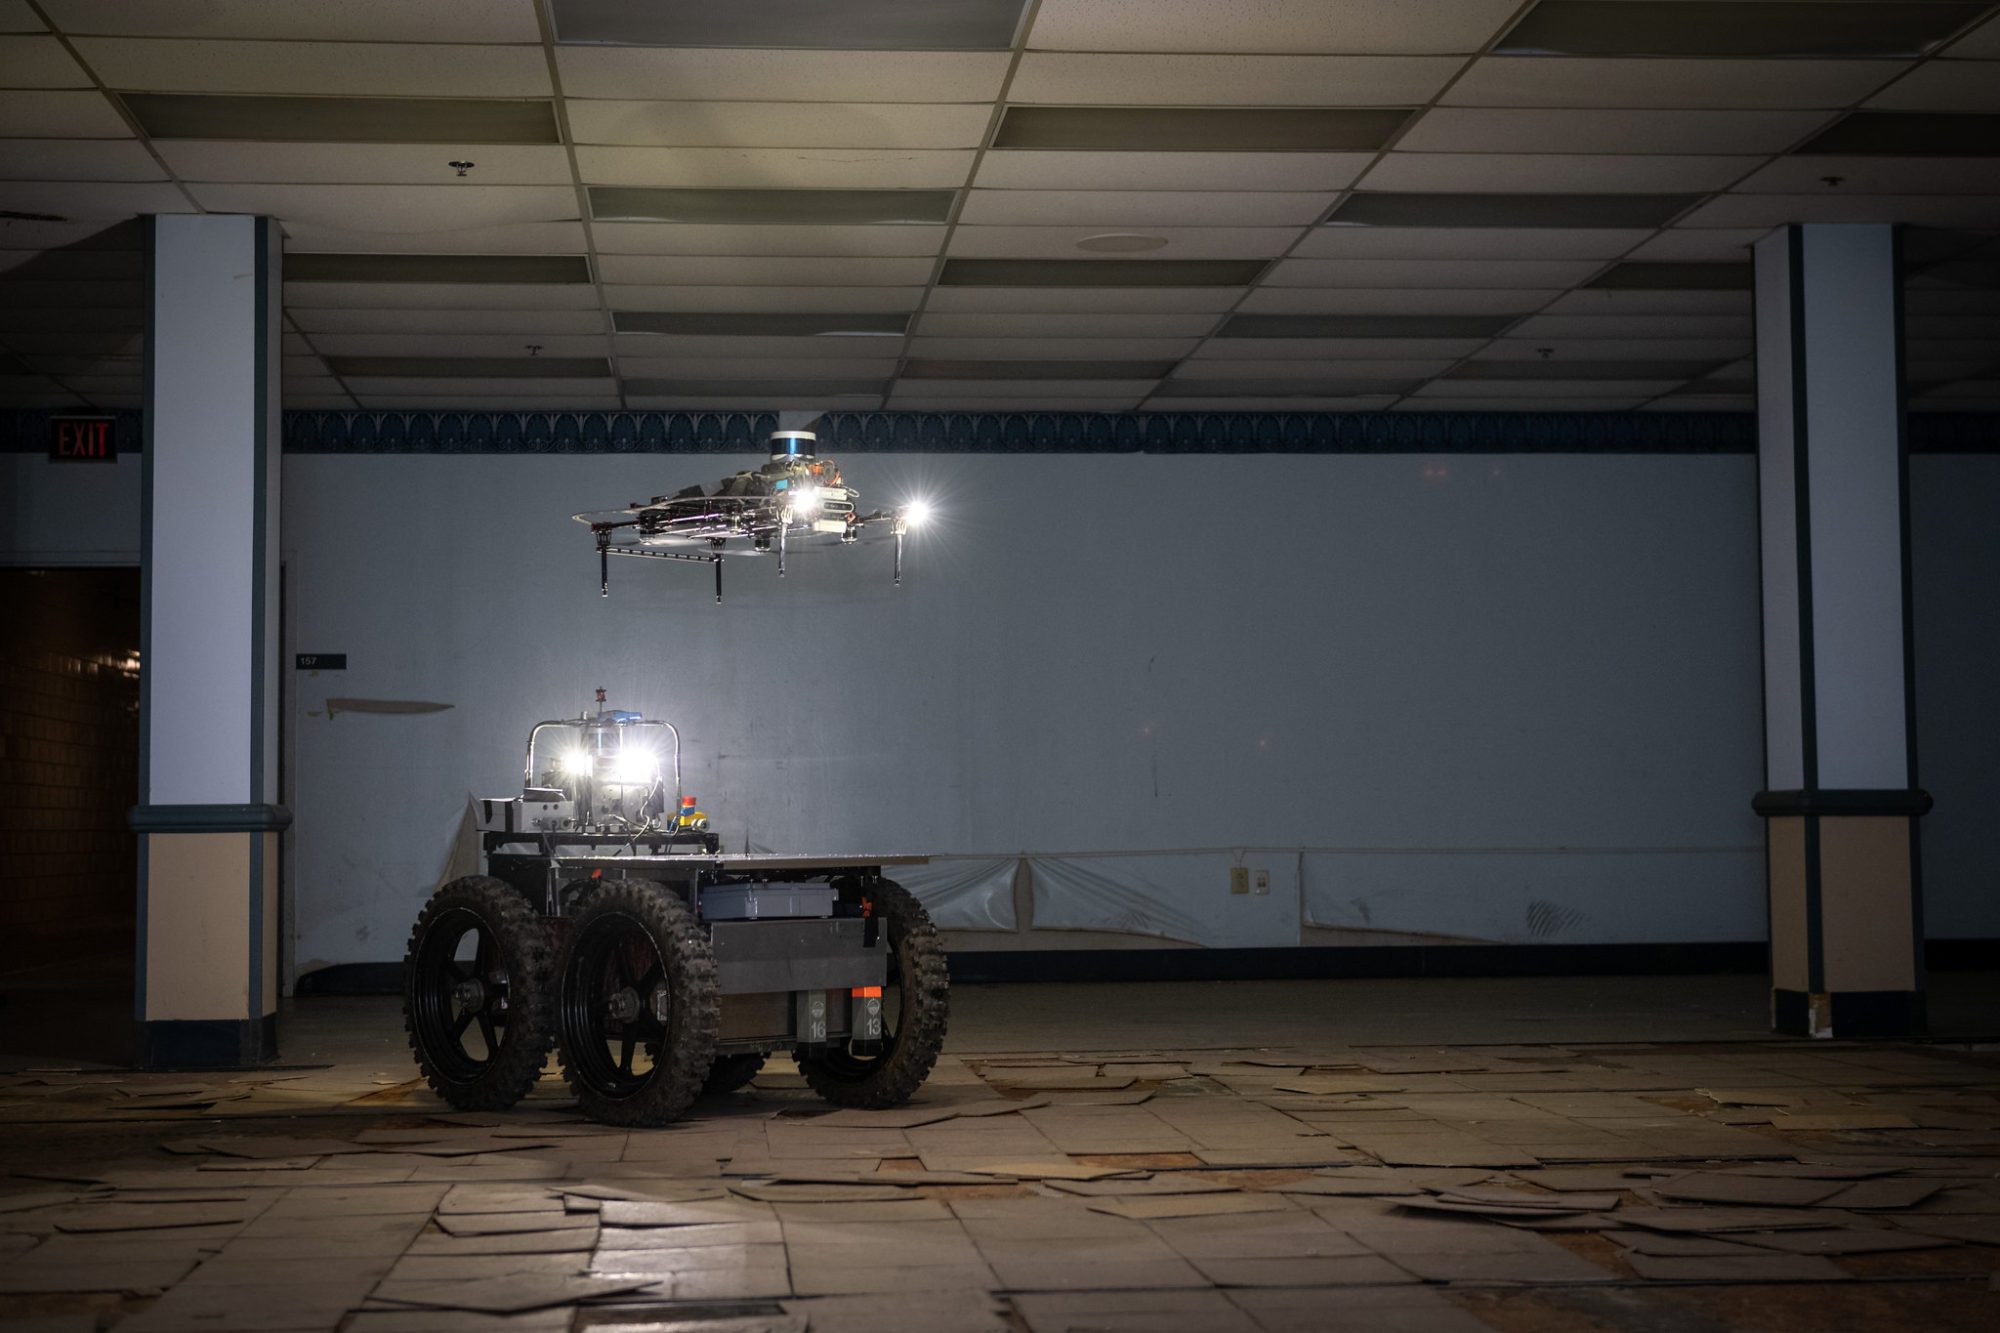 robot and drone hovering in the carnegie mellon university academic and private research